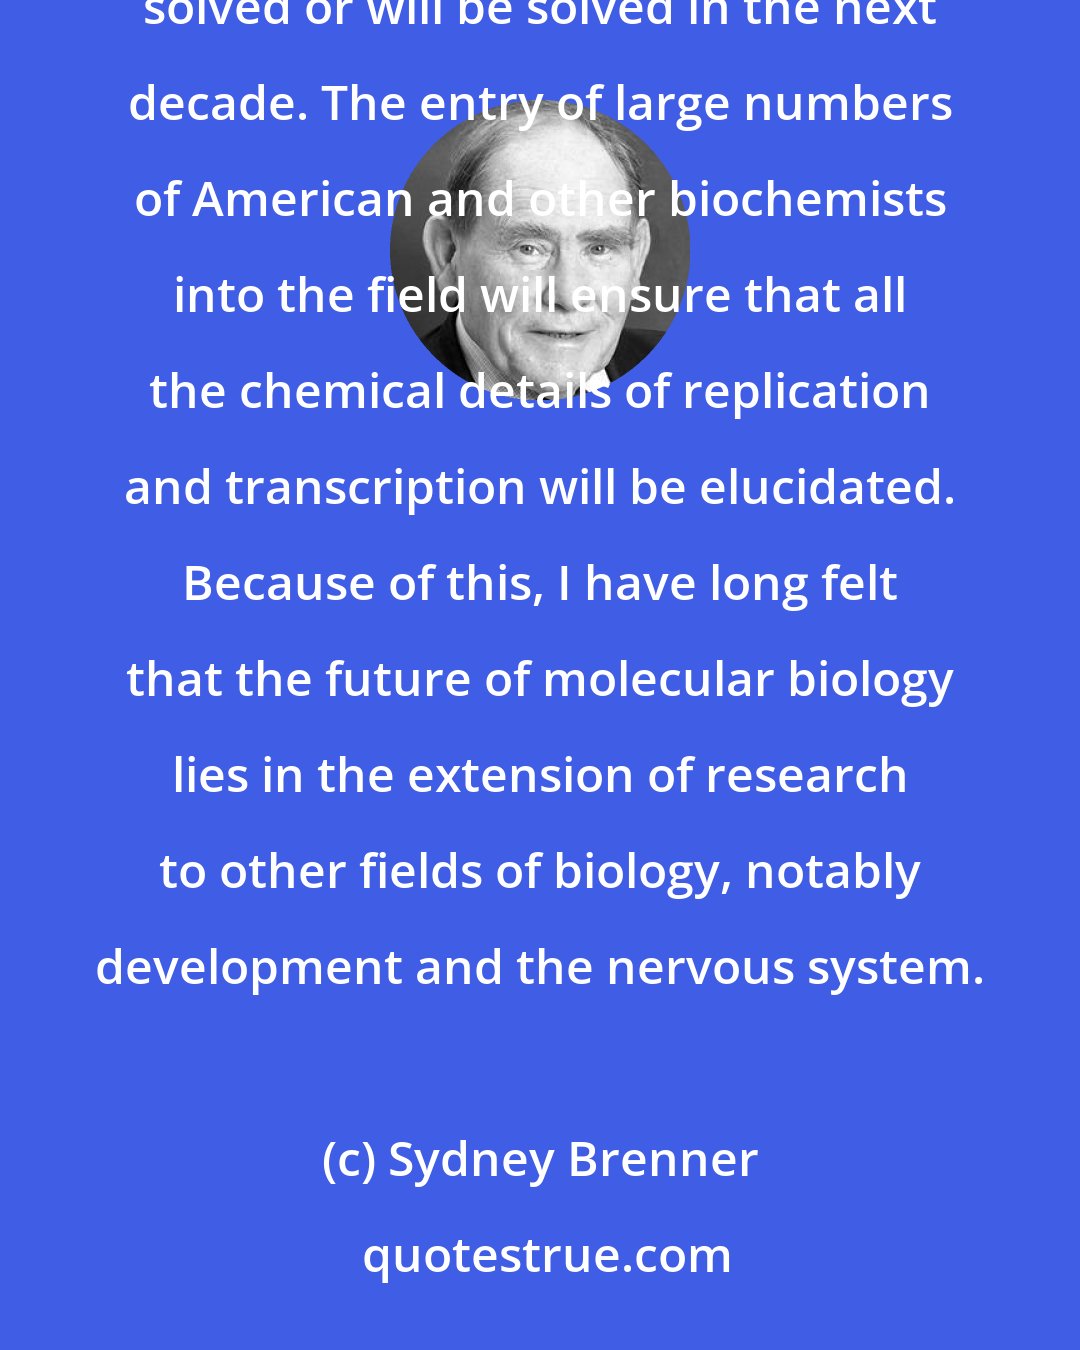 Sydney Brenner: It is now widely realized that nearly all the 'classical' problems of molecular biology have either been solved or will be solved in the next decade. The entry of large numbers of American and other biochemists into the field will ensure that all the chemical details of replication and transcription will be elucidated. Because of this, I have long felt that the future of molecular biology lies in the extension of research to other fields of biology, notably development and the nervous system.